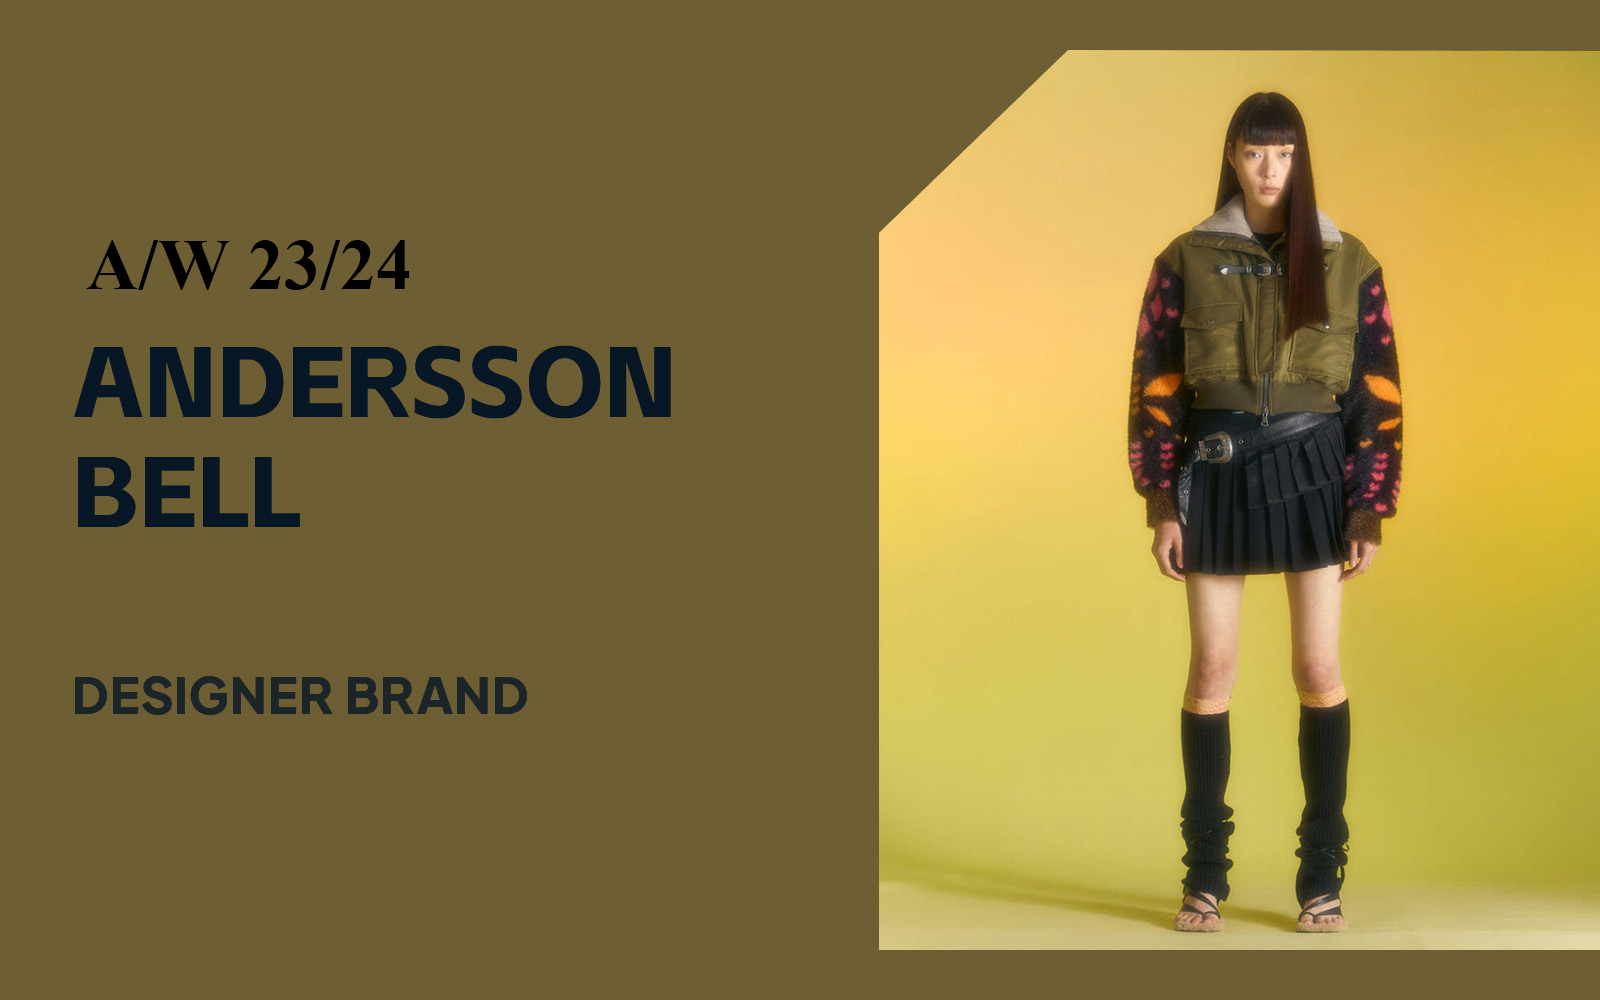 Nostalgic and Sexy -- The Analysis of Andersson Bell The Womenswear Designer Brand